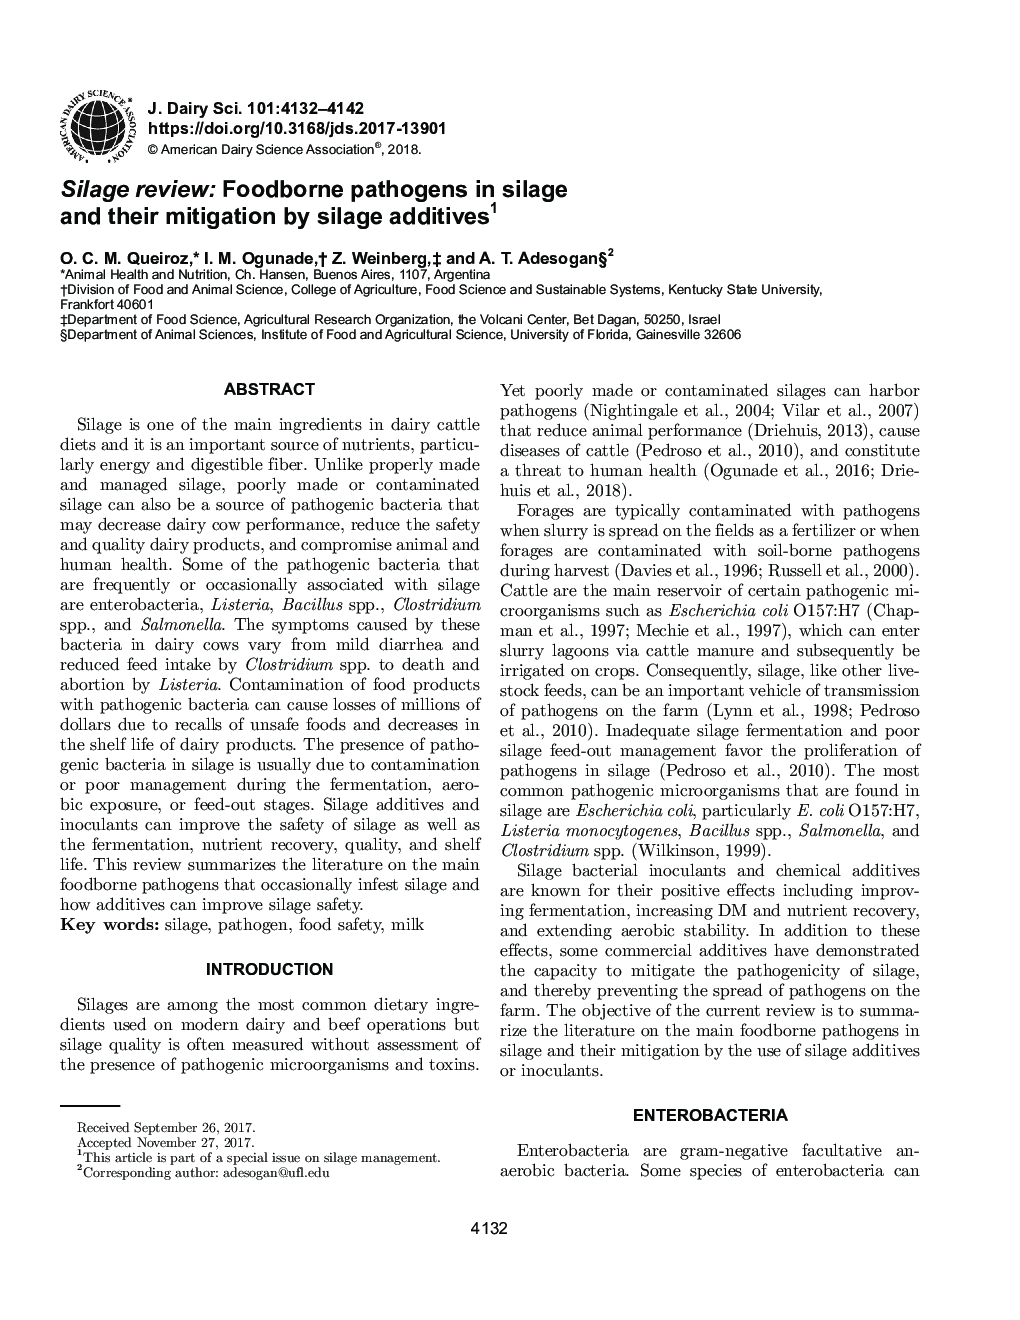 Silage review: Foodborne pathogens in silage and their mitigation by silage additives